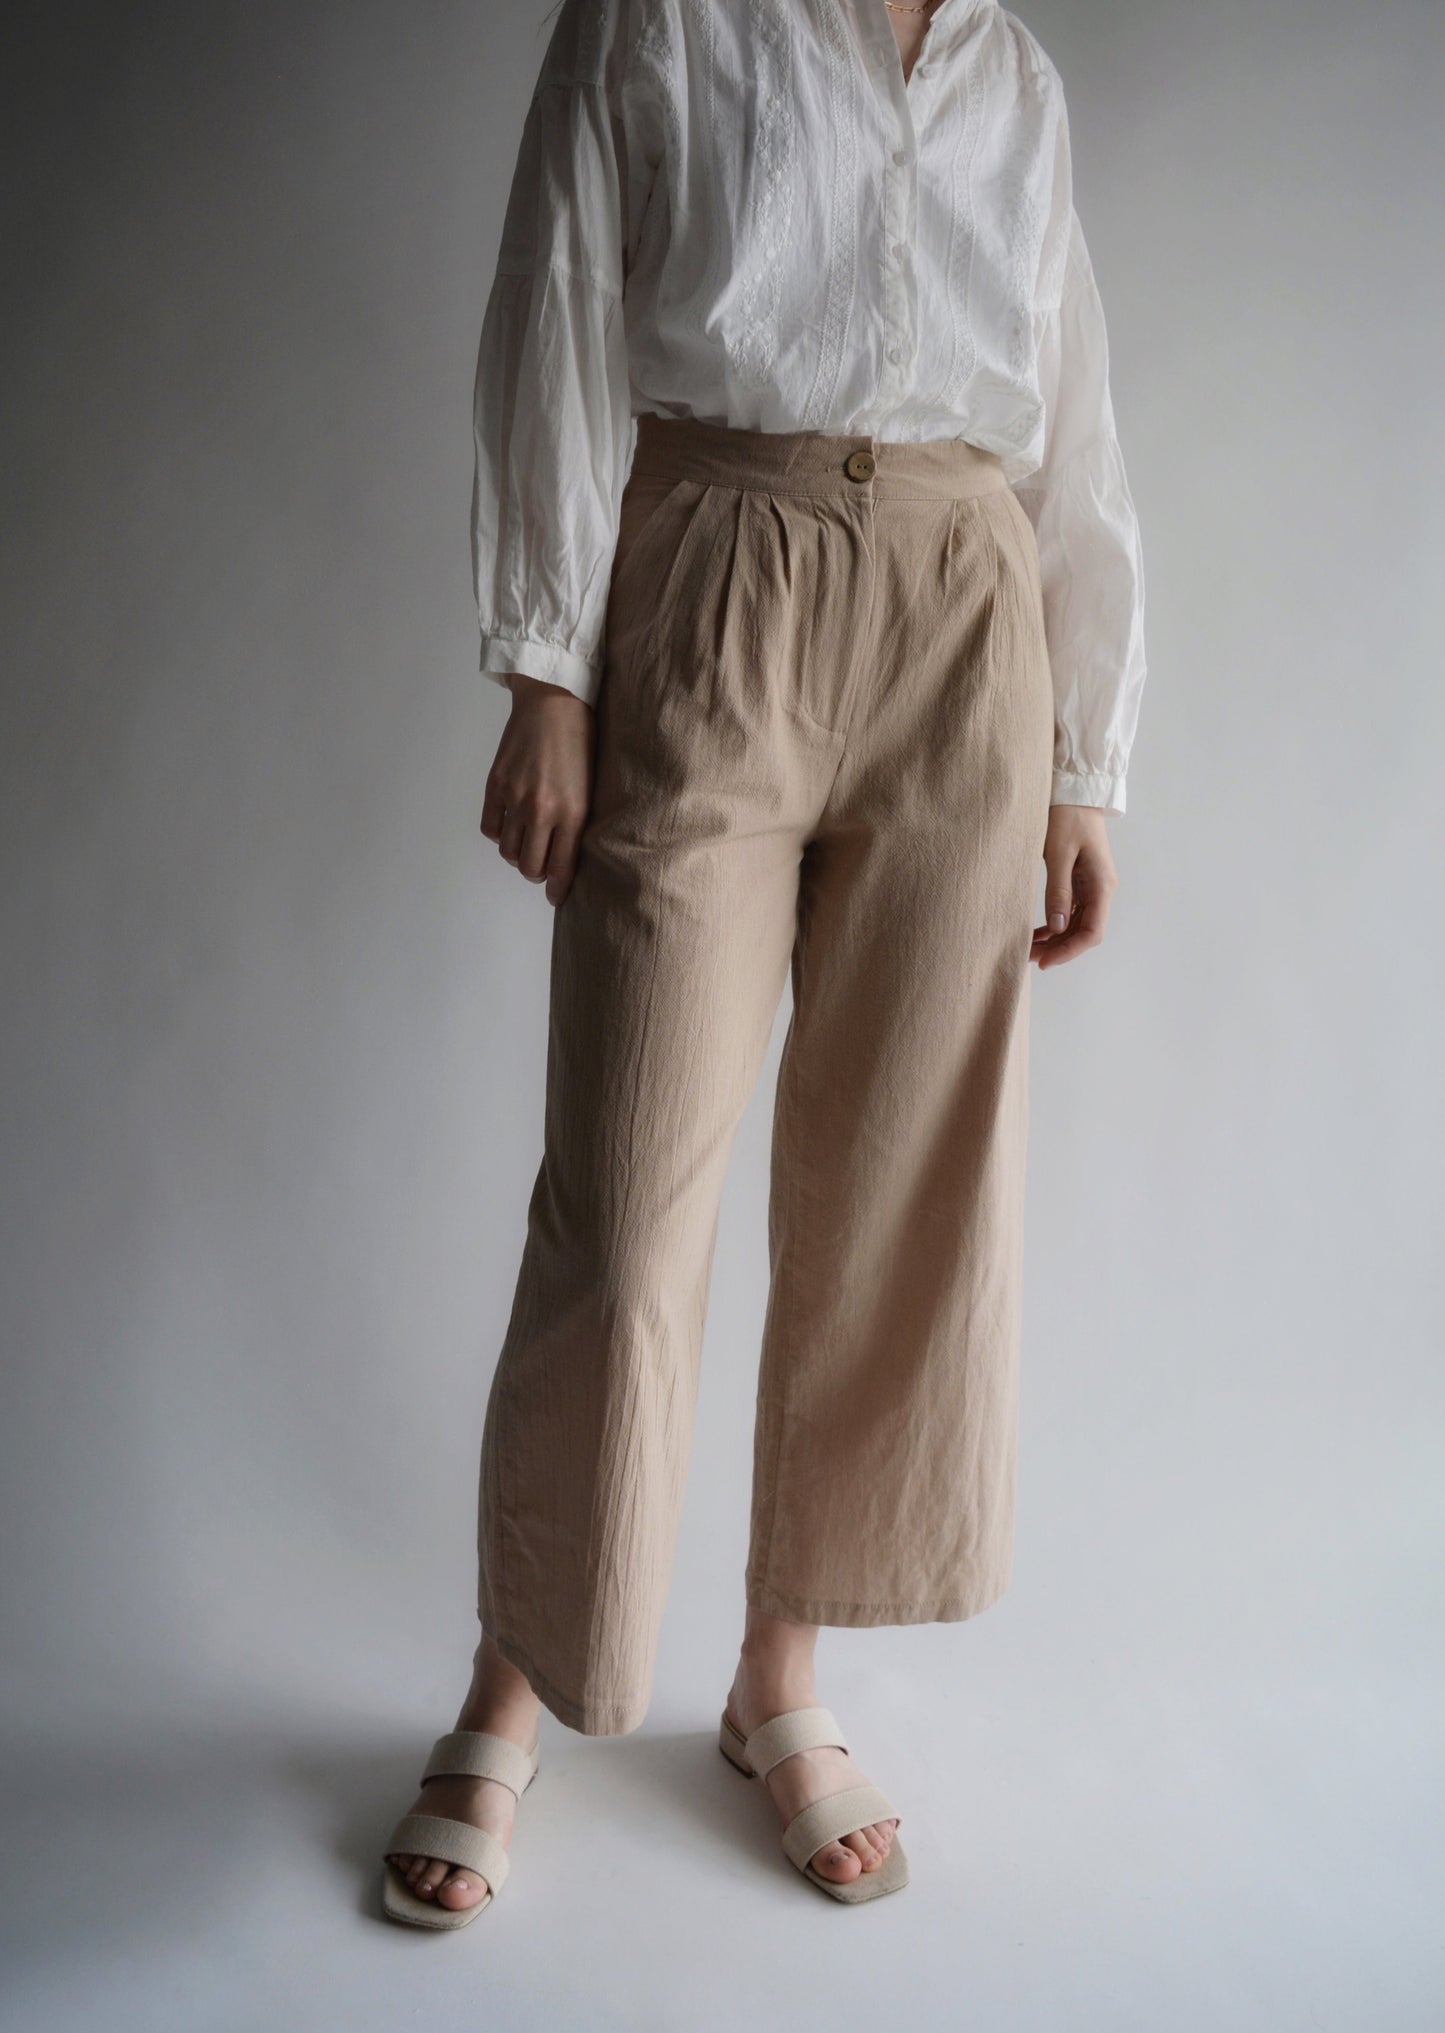 Pants in Iced Latte color